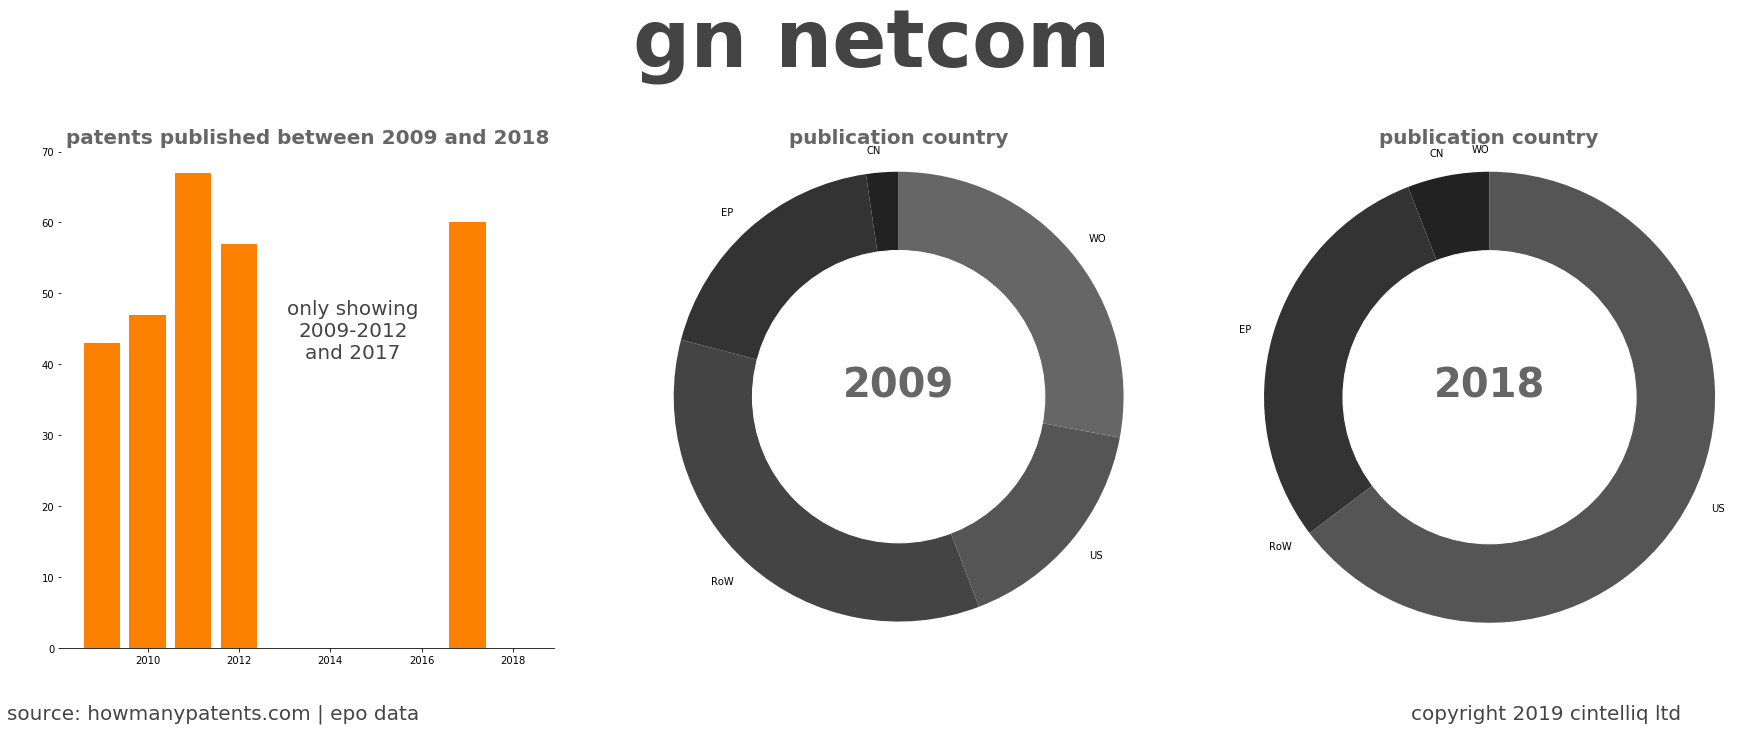 summary of patents for Gn Netcom